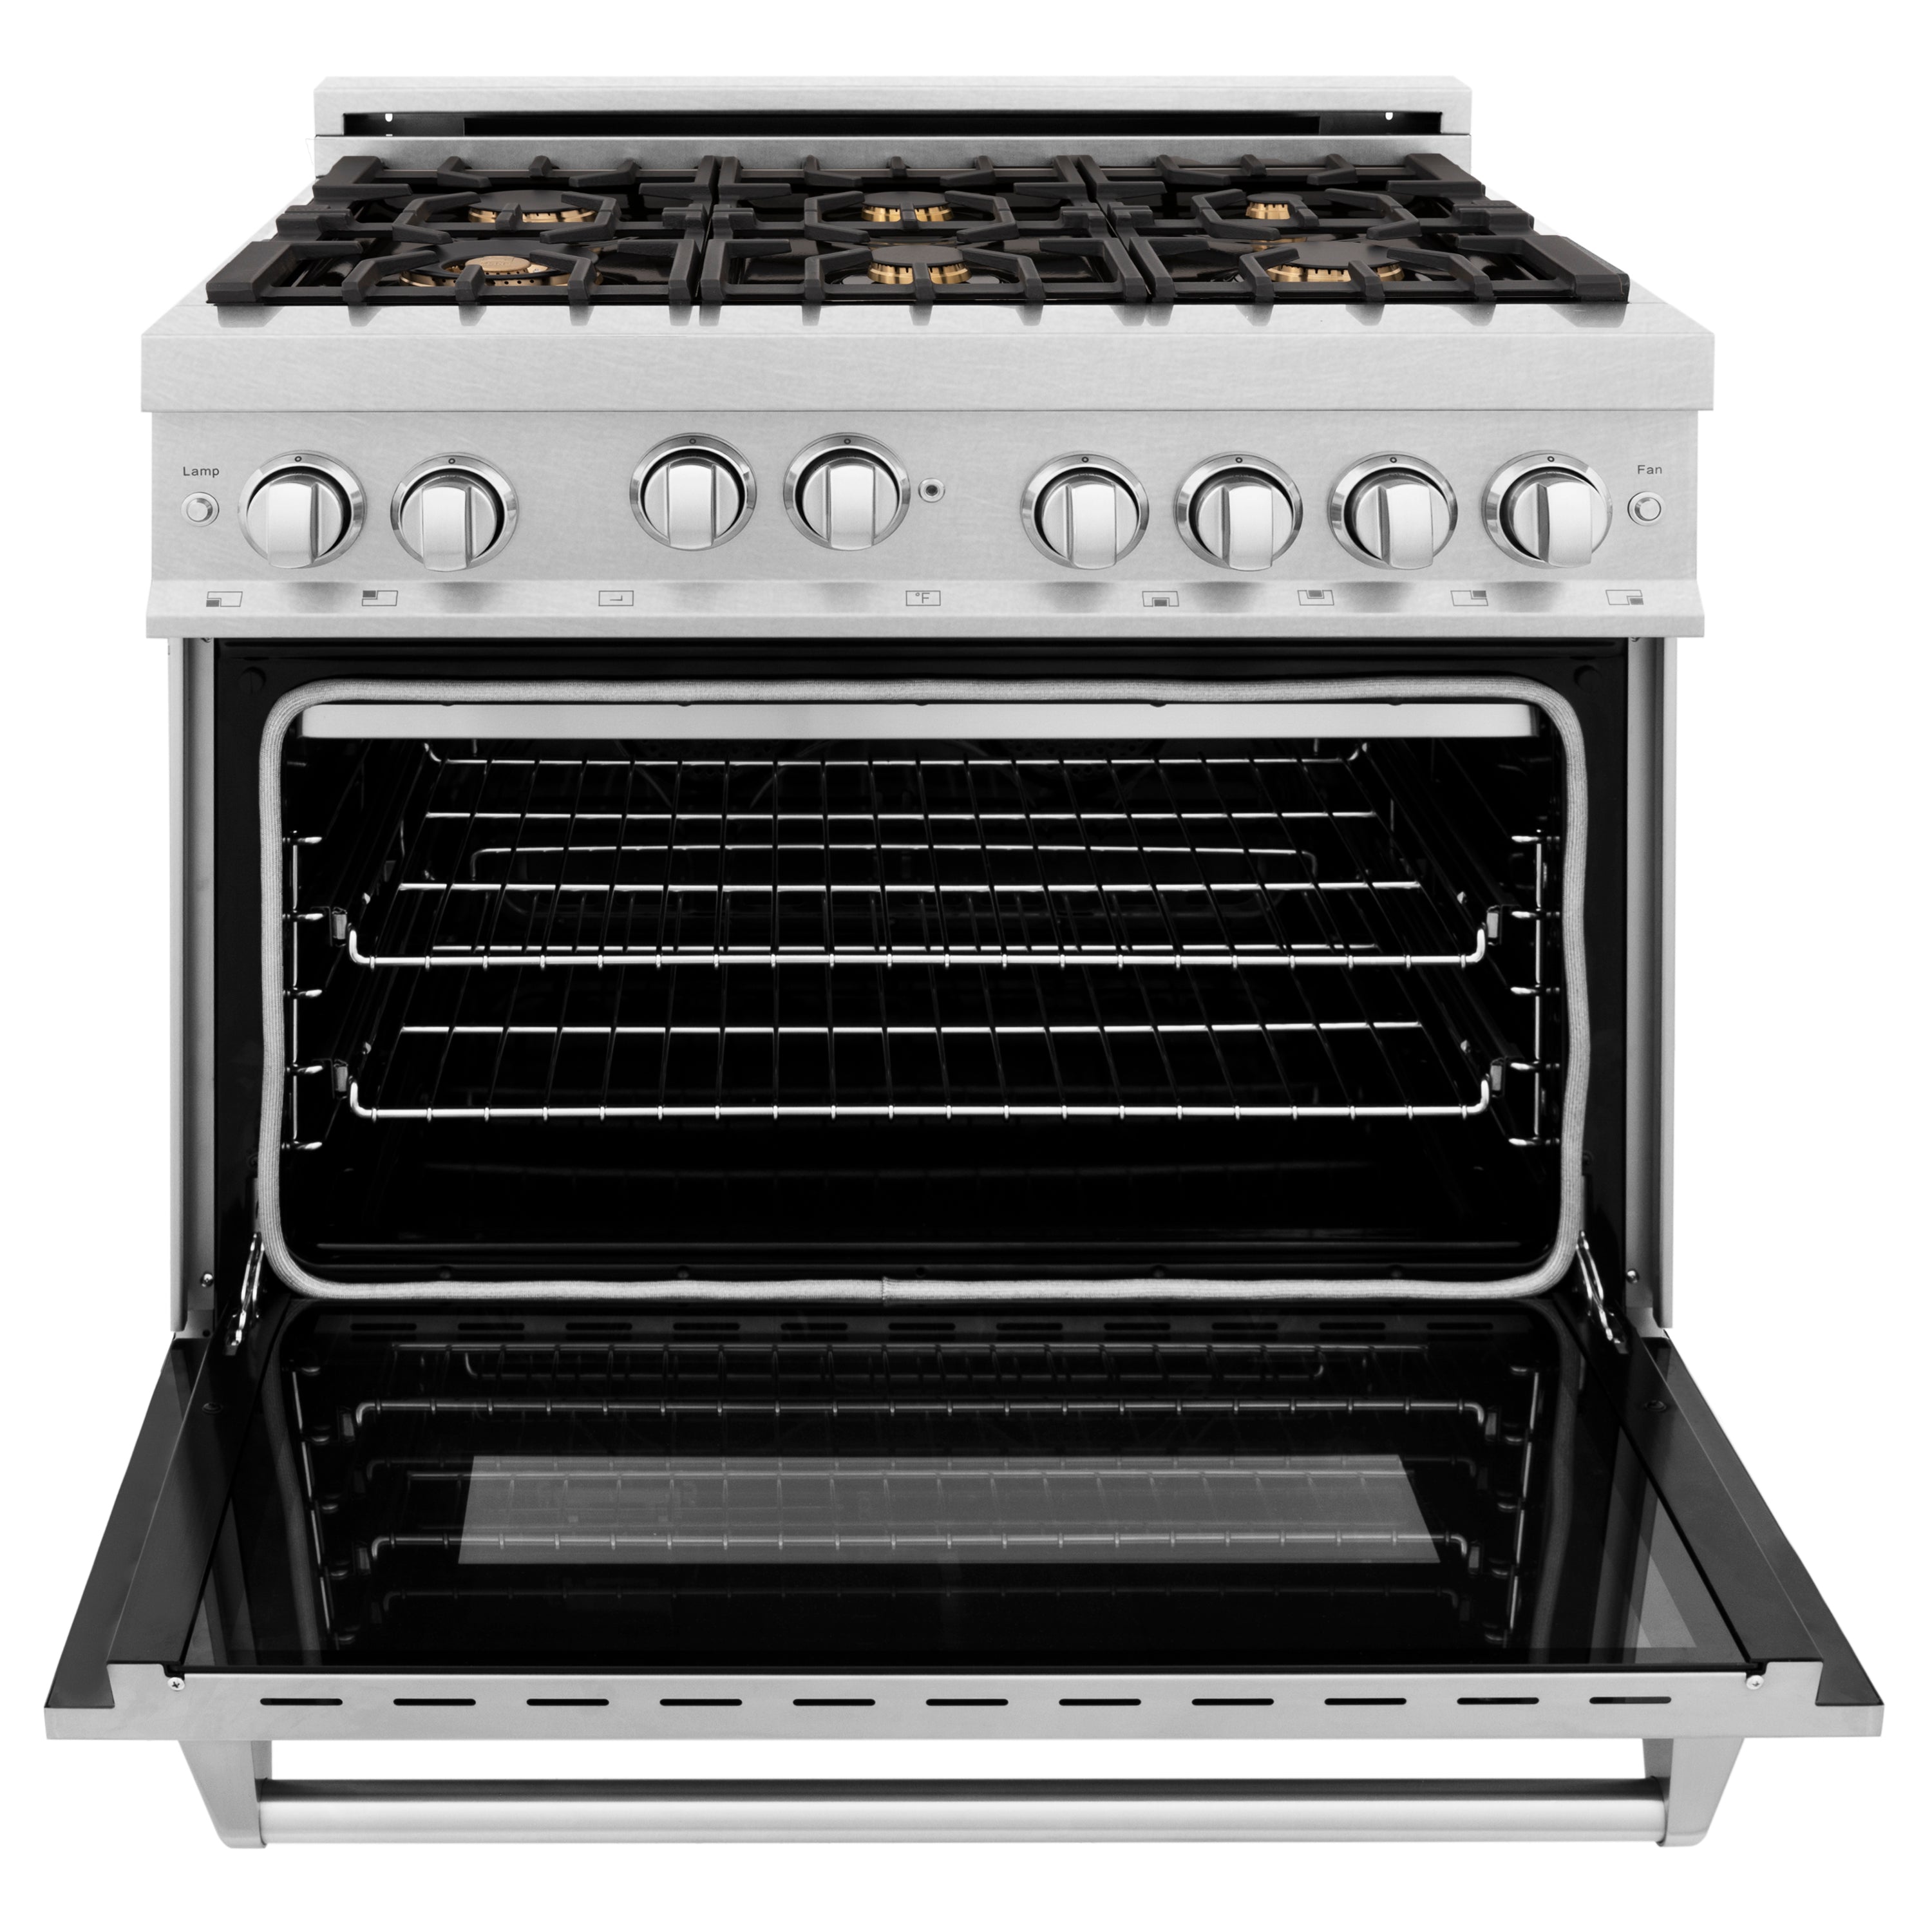 ZLINE 36 in. 4.6 cu. ft. Gas Oven and Gas Cooktop Range with Griddle and Brass Burners in Fingerprint Resistant Stainless Steel (RGS-SN-BR-GR-36)